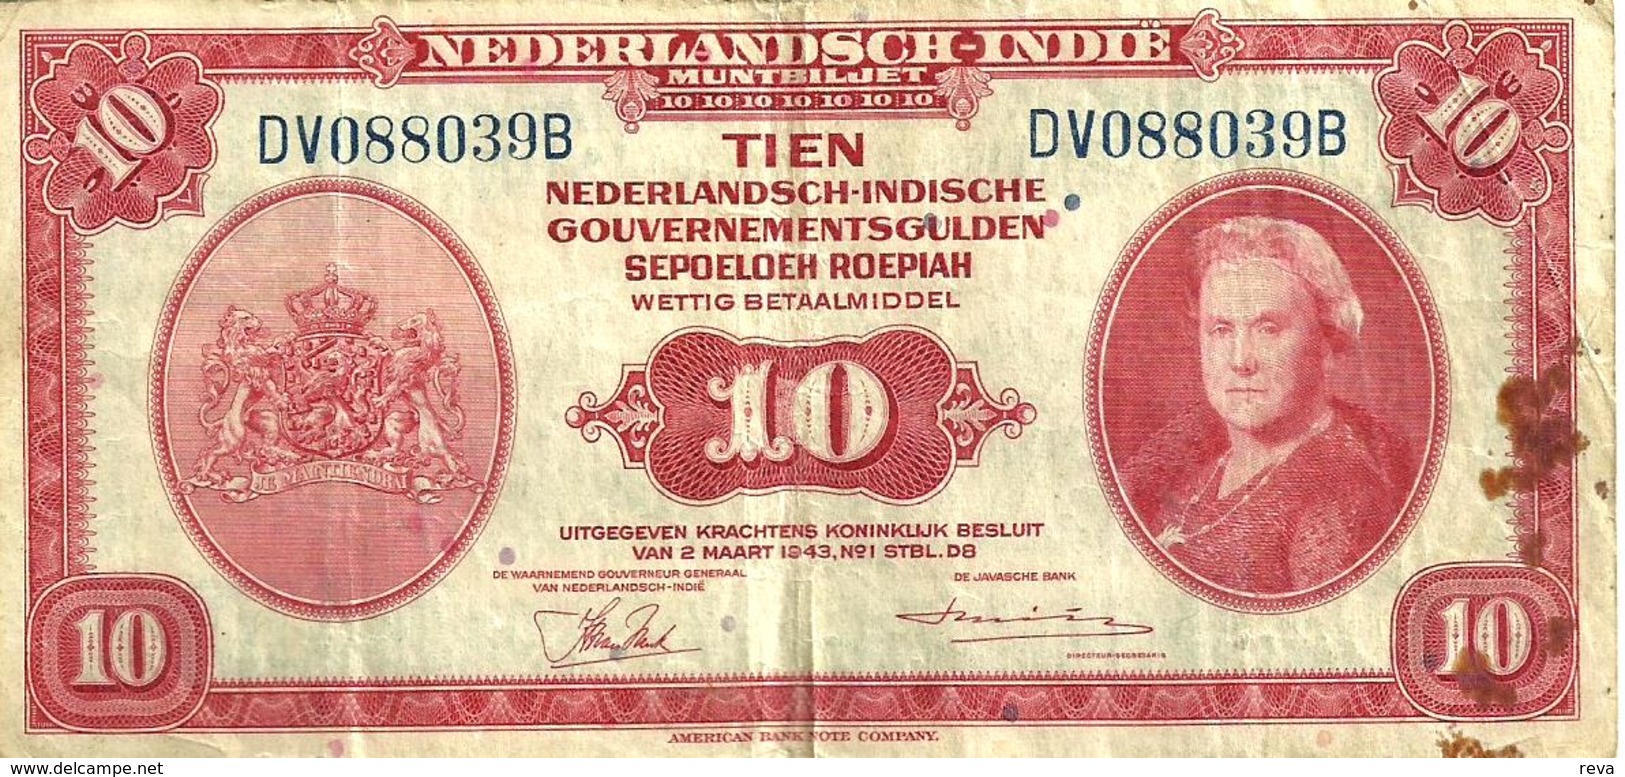 NETHERLANDS EAST INDIES 10 GULDEN RED WOMAN FRONT AIRPLANE SHIPDATED2.MARCH 1943 P114a 2ND VARIETY F+ READ DESCRIPTION!! - Dutch East Indies